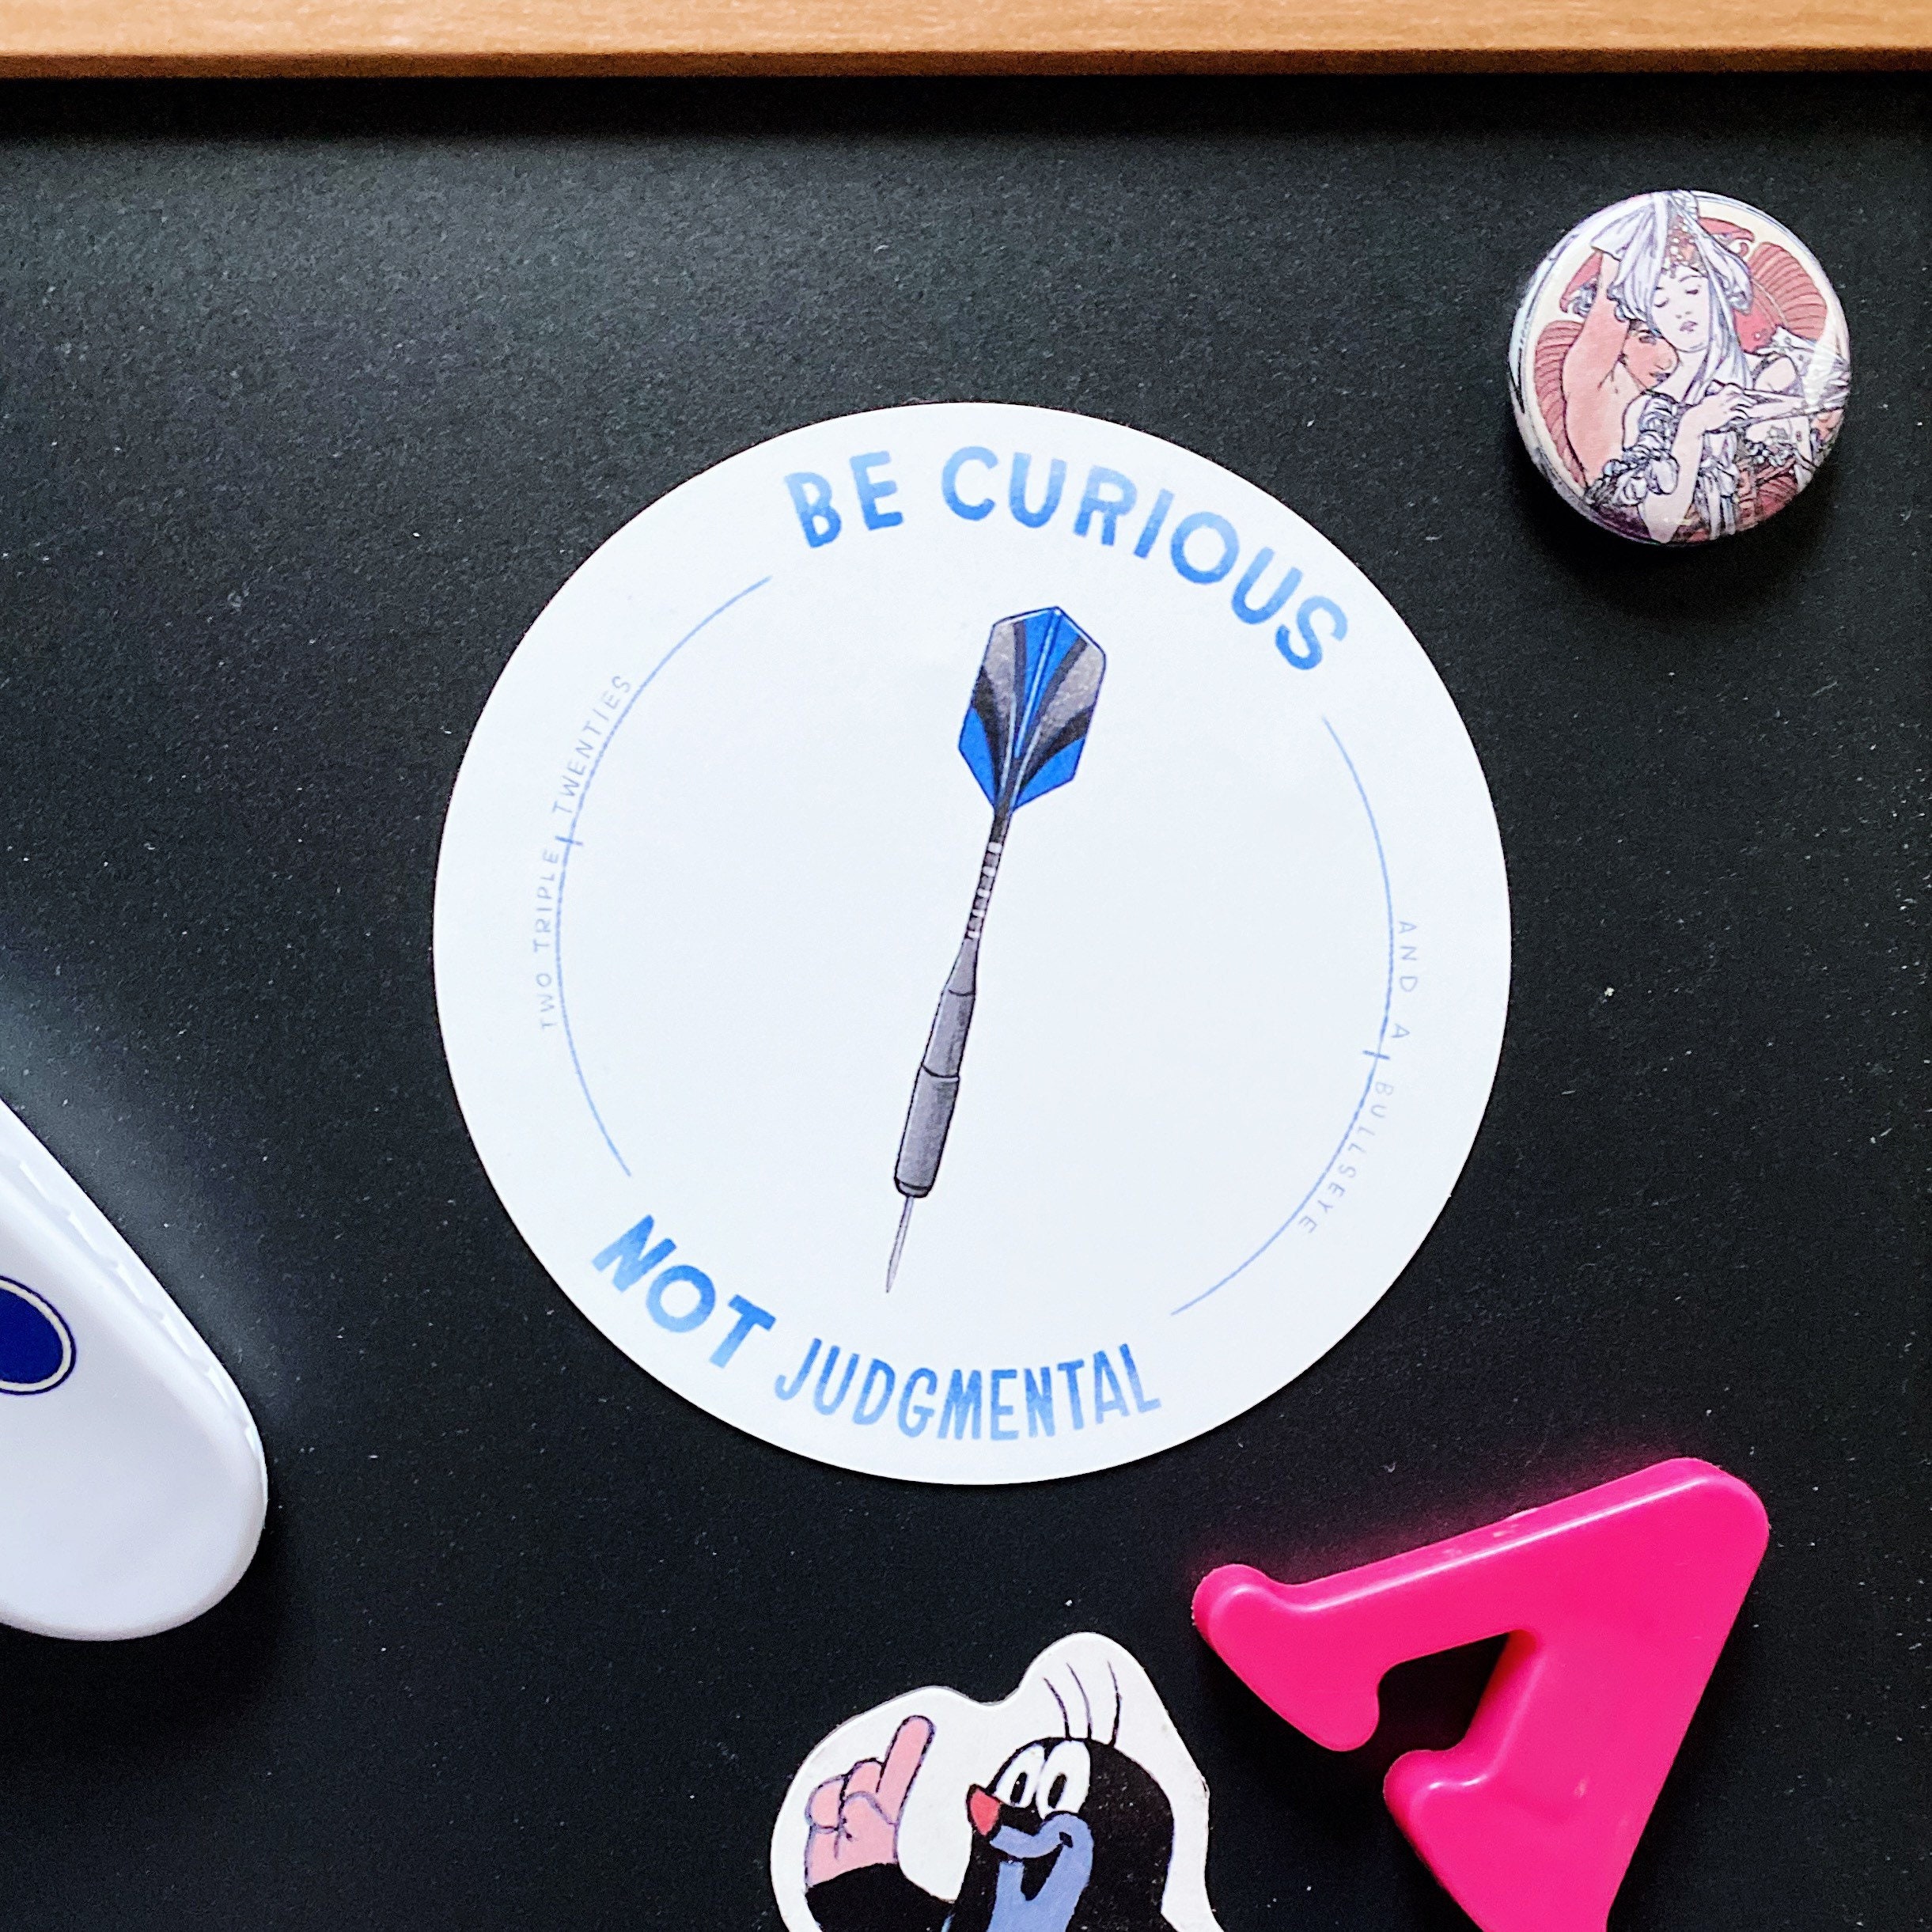 Be Curious Judgmental 3 Magnet Darts - Etsy